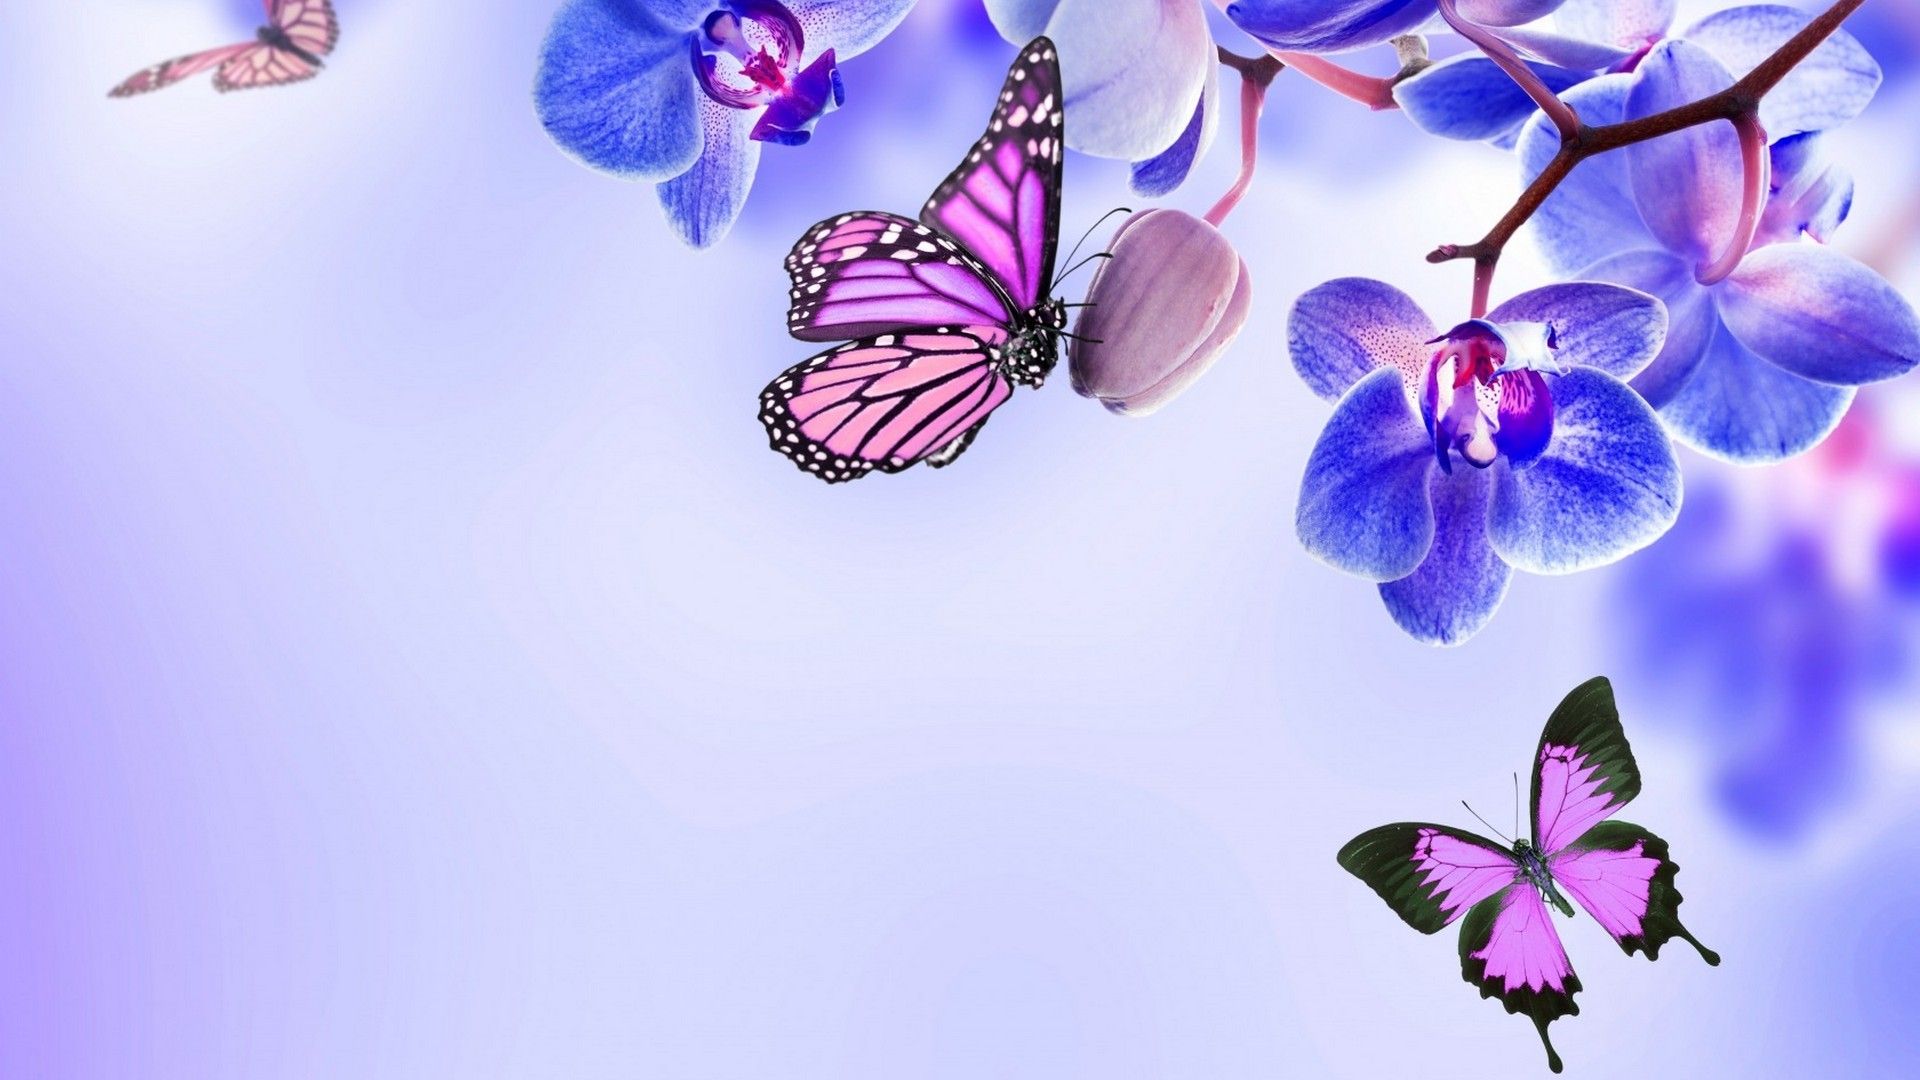 Exquisite Butterfly desktop backgrounds for delicate beauty